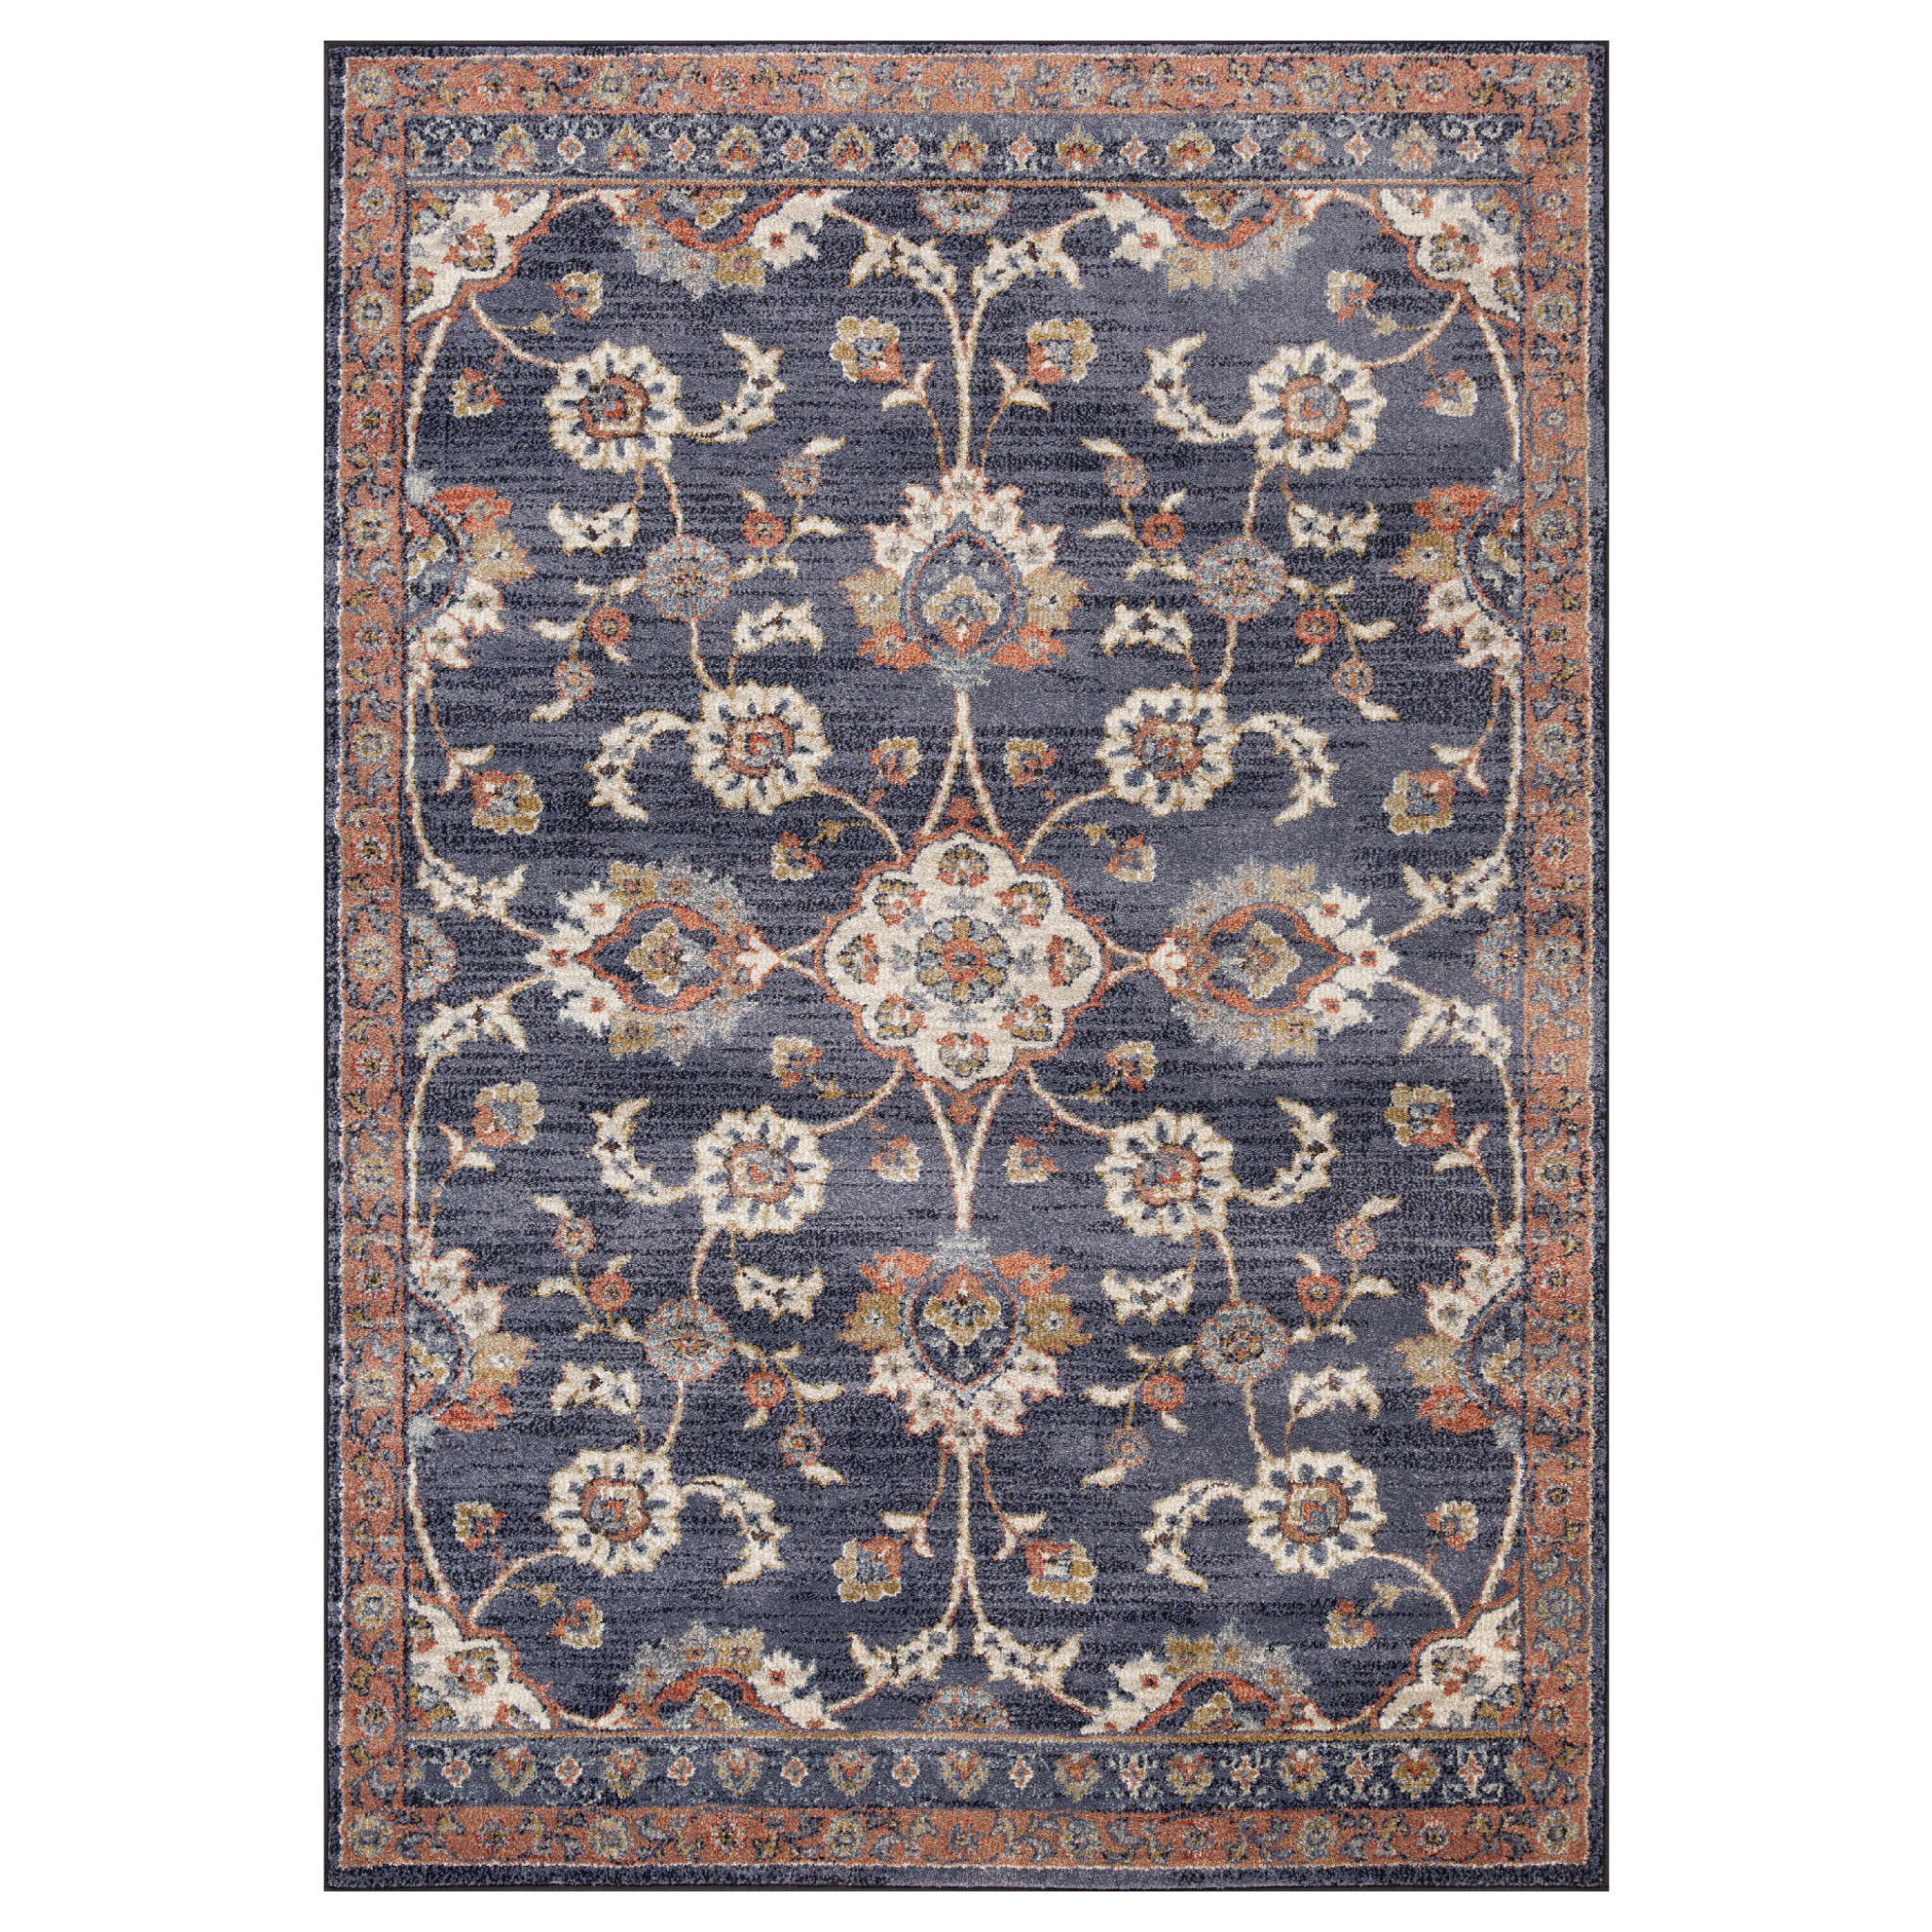 2' x 3' Navy Blue Floral Power Loom Area Rug With Fringe-532153-1